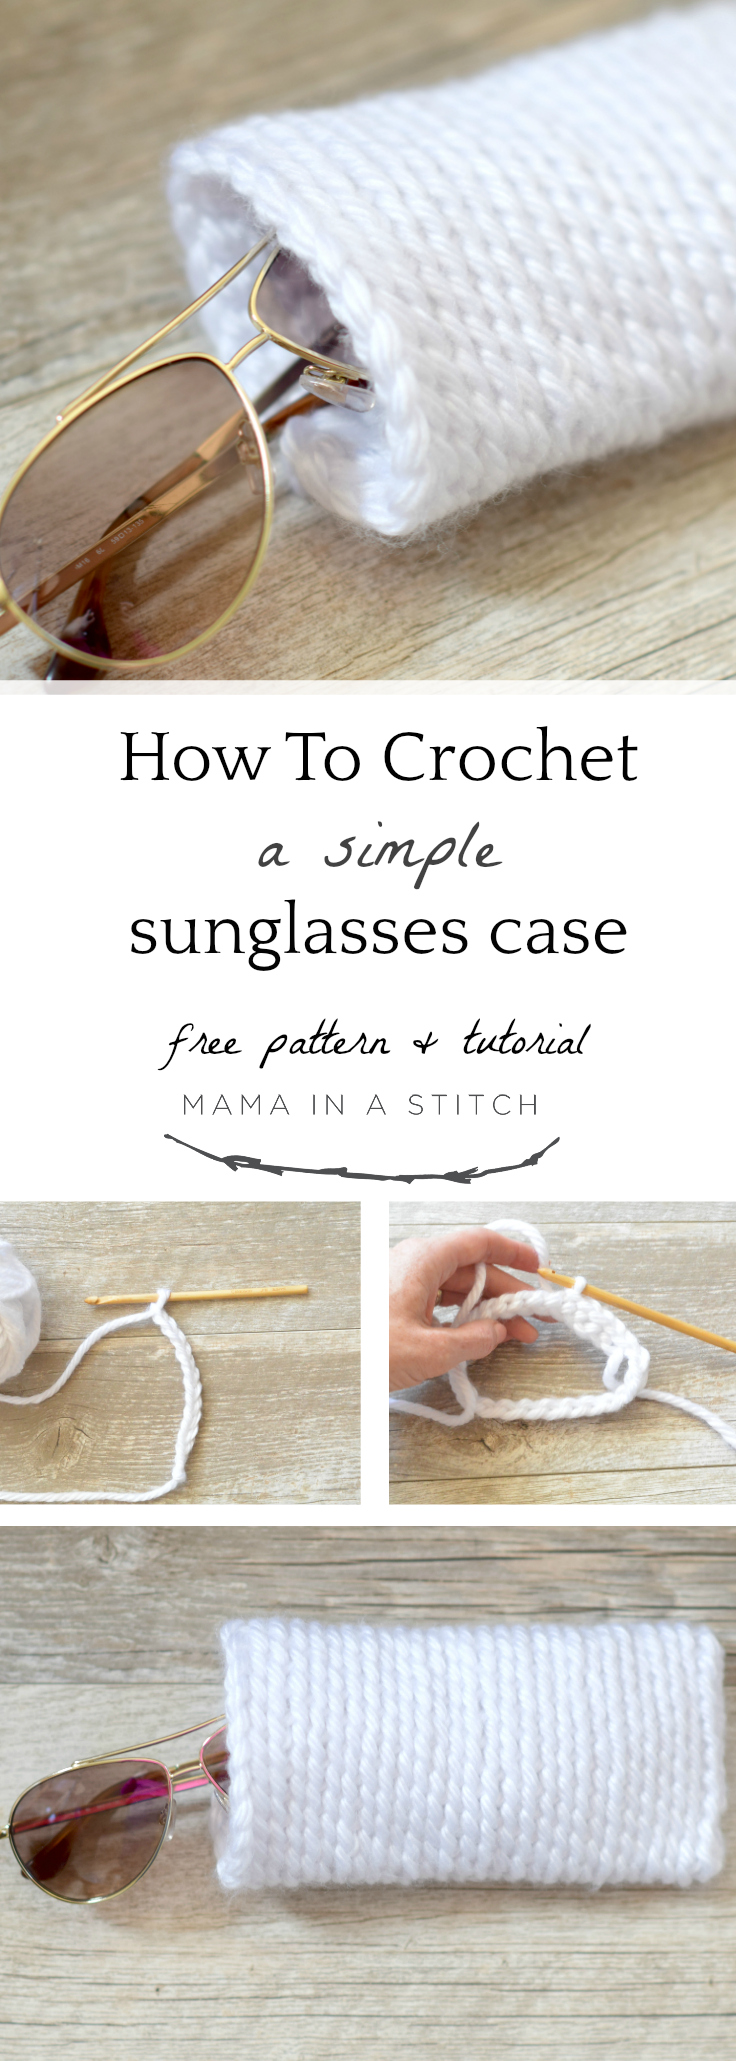 How To Crochet A Sunglasses Case